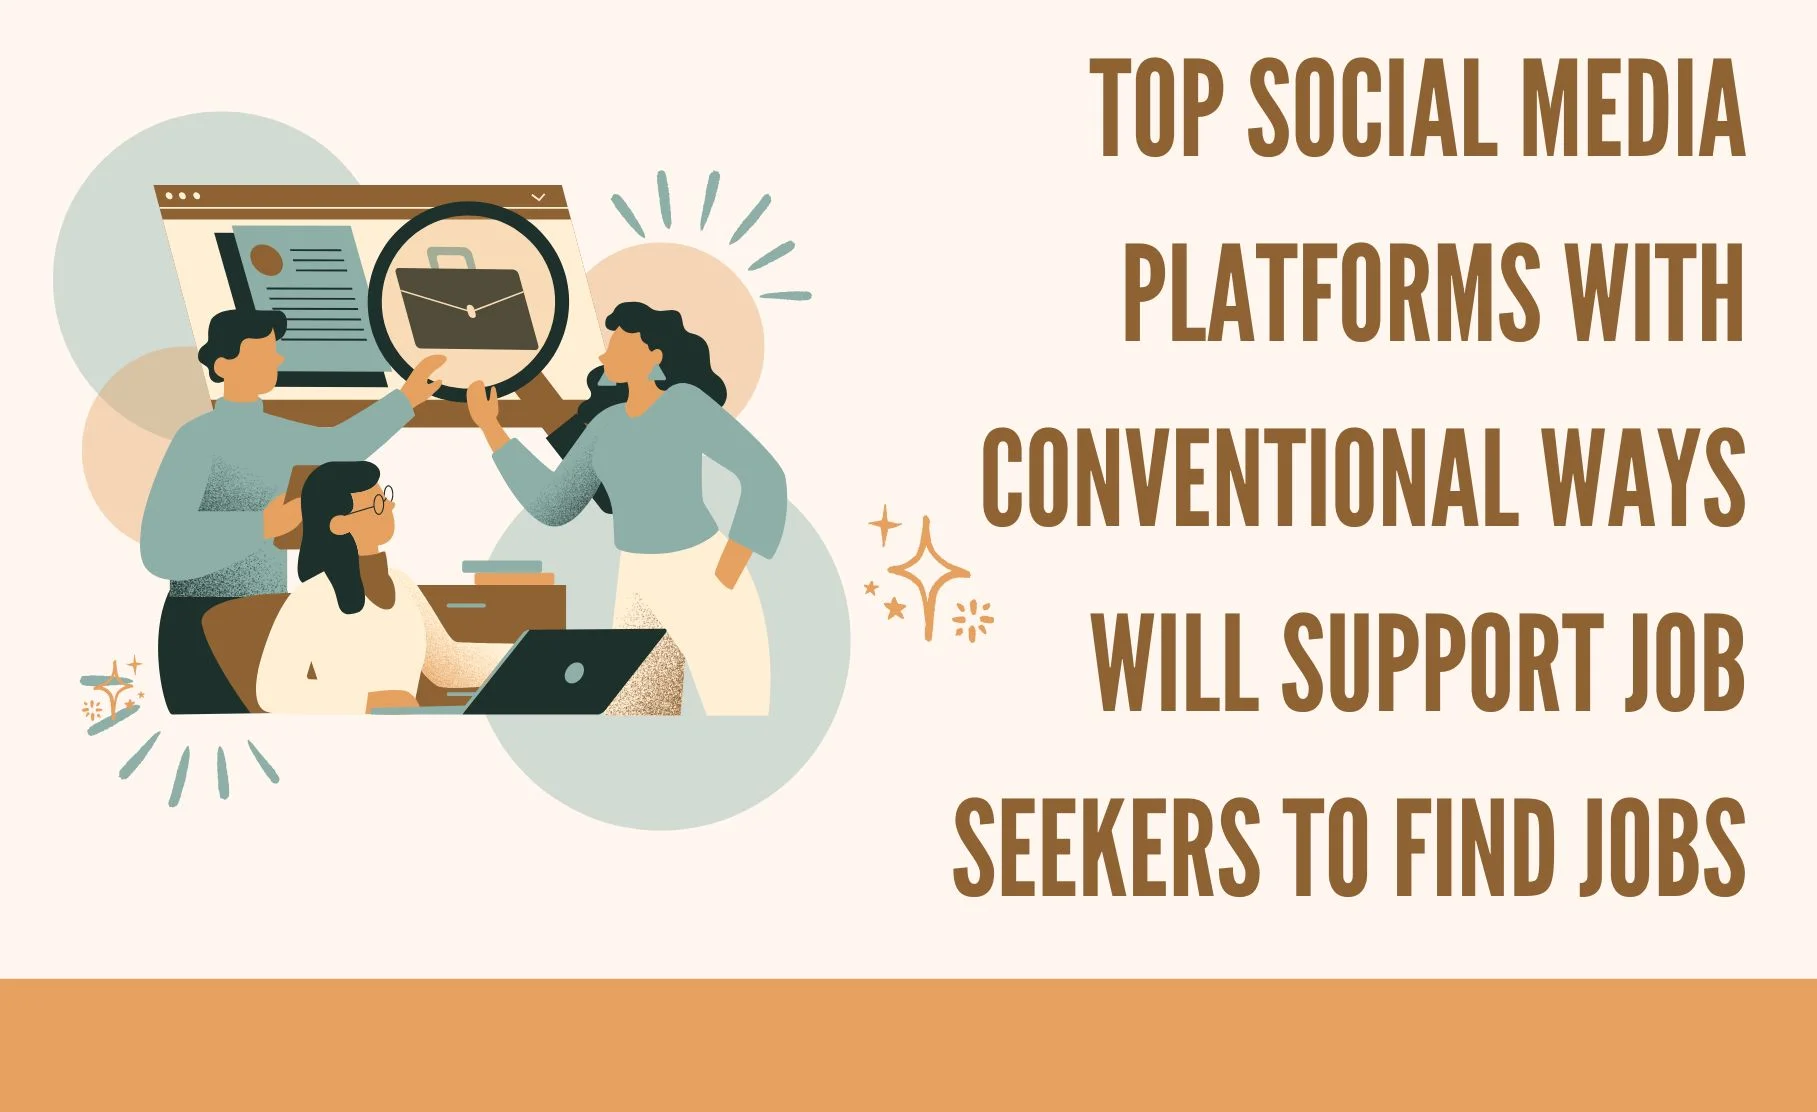 Top Social Media Platforms with Conventional Ways Will Support Job Seekers to Find Jobs